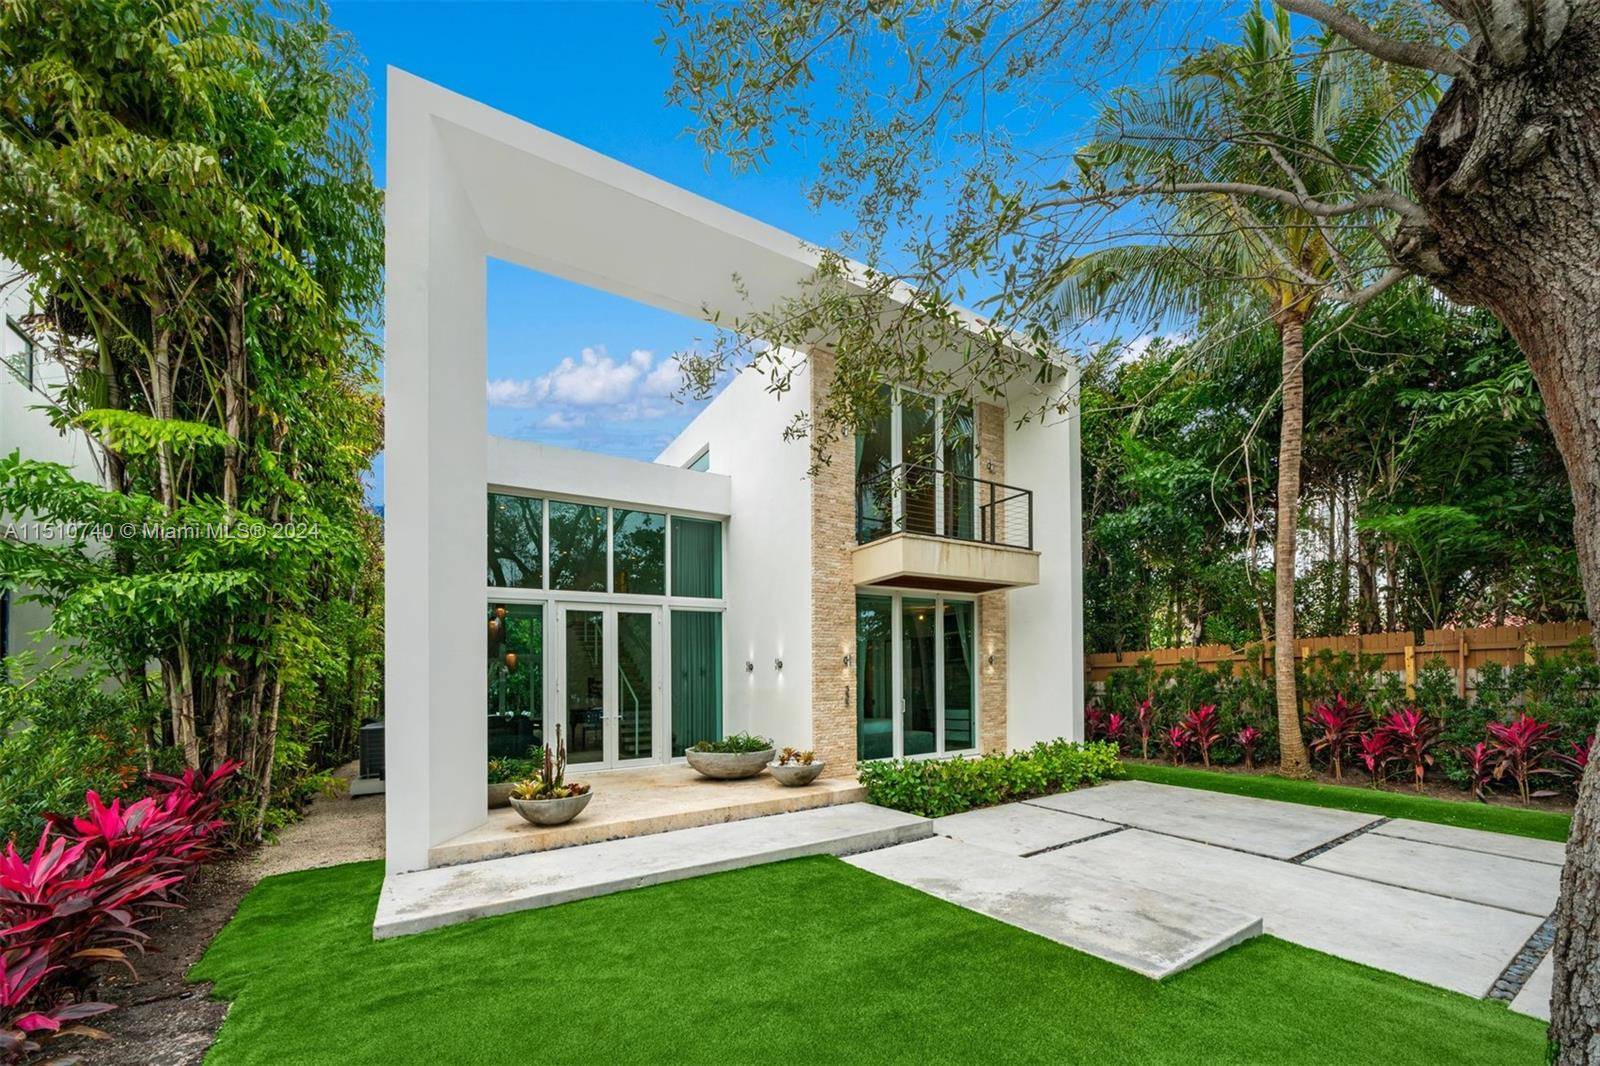 Nestled in the highly sought after Mid Beach neighborhood, this exquisite home seamlessly combines timeless elegance with modern design, offering the epitome of luxurious South Florida living.